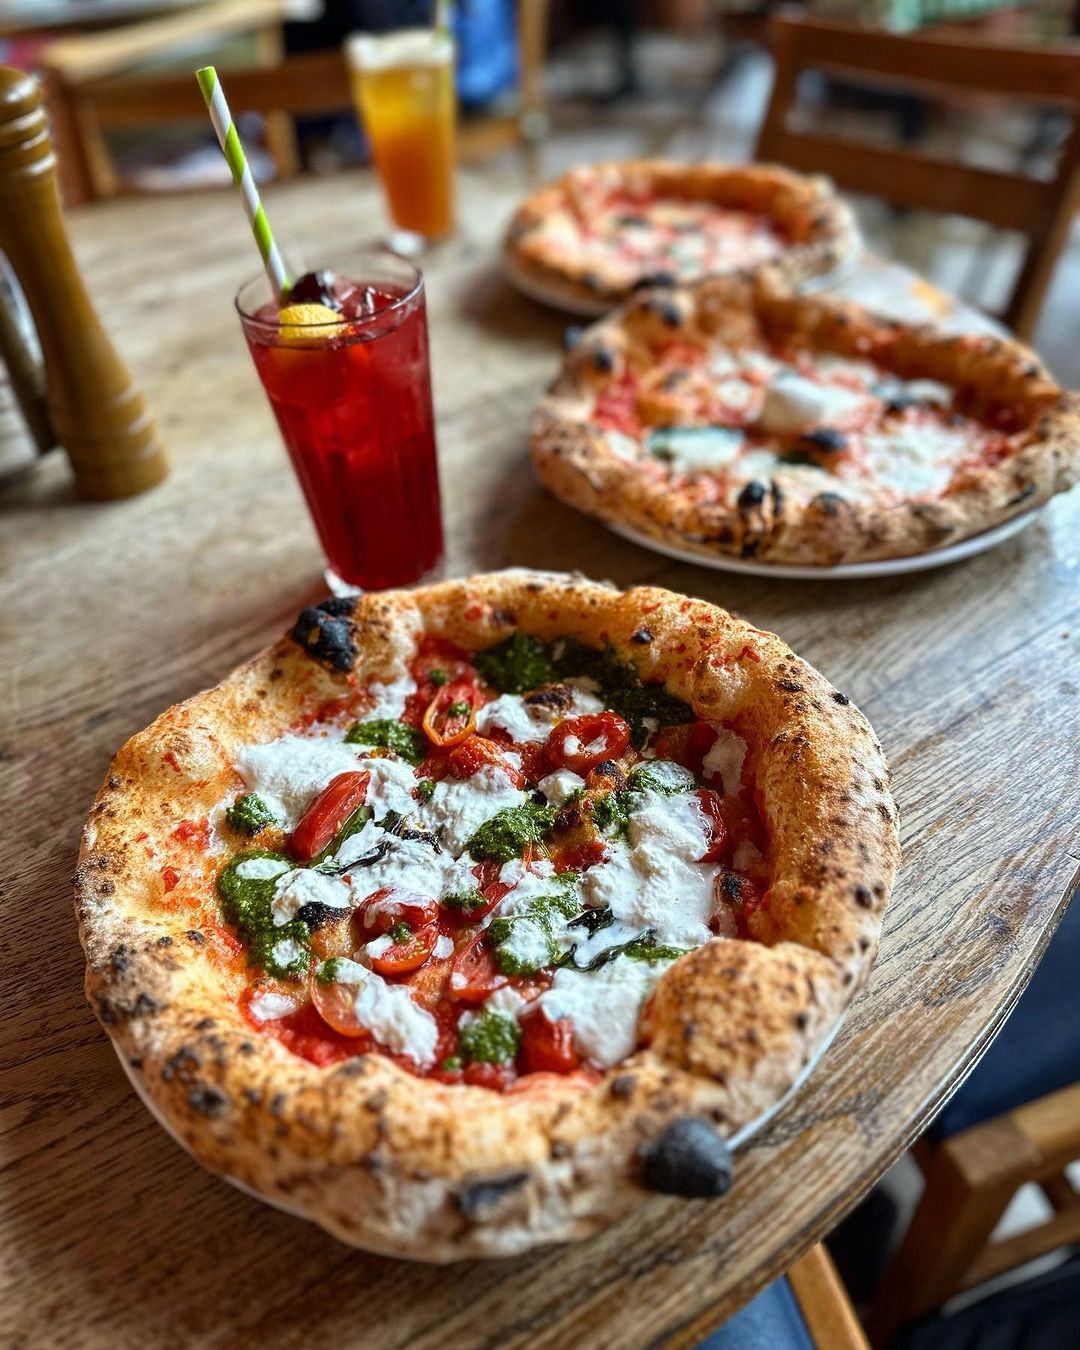 Three pizzas in a row on a wooden table.